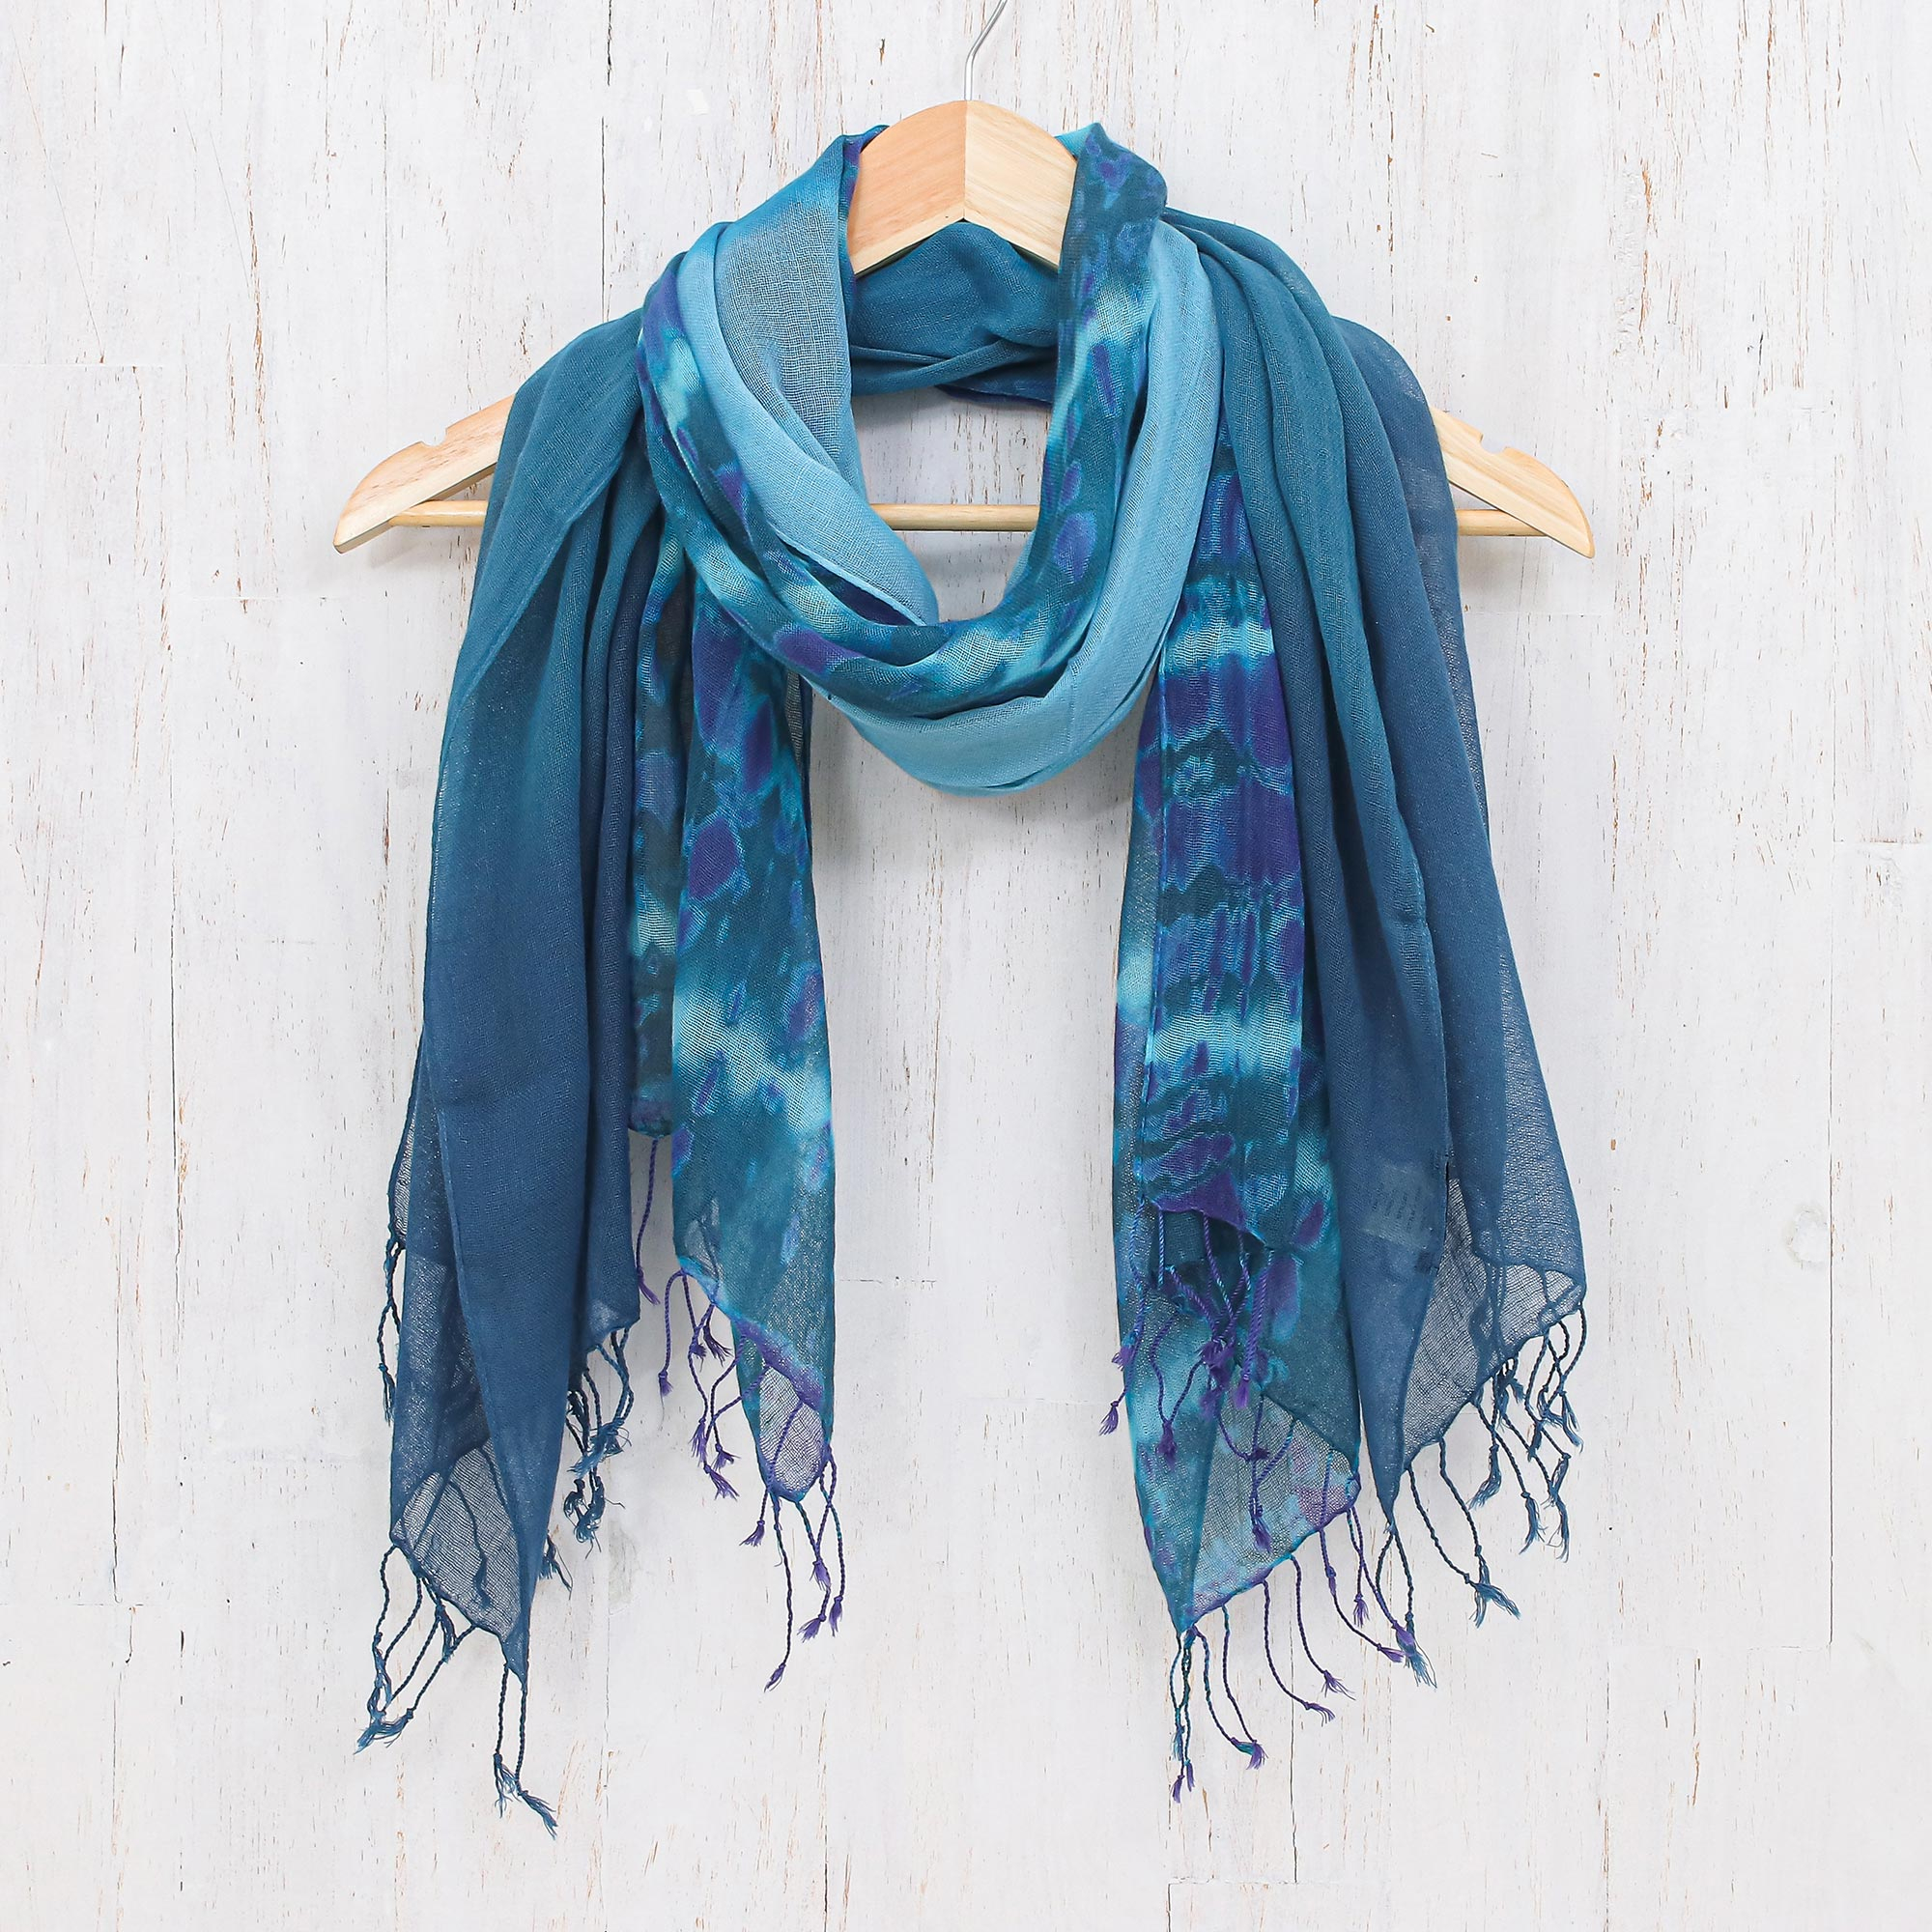 Pair of Cotton Scarves in Shades of Blue - Sea of Love | NOVICA